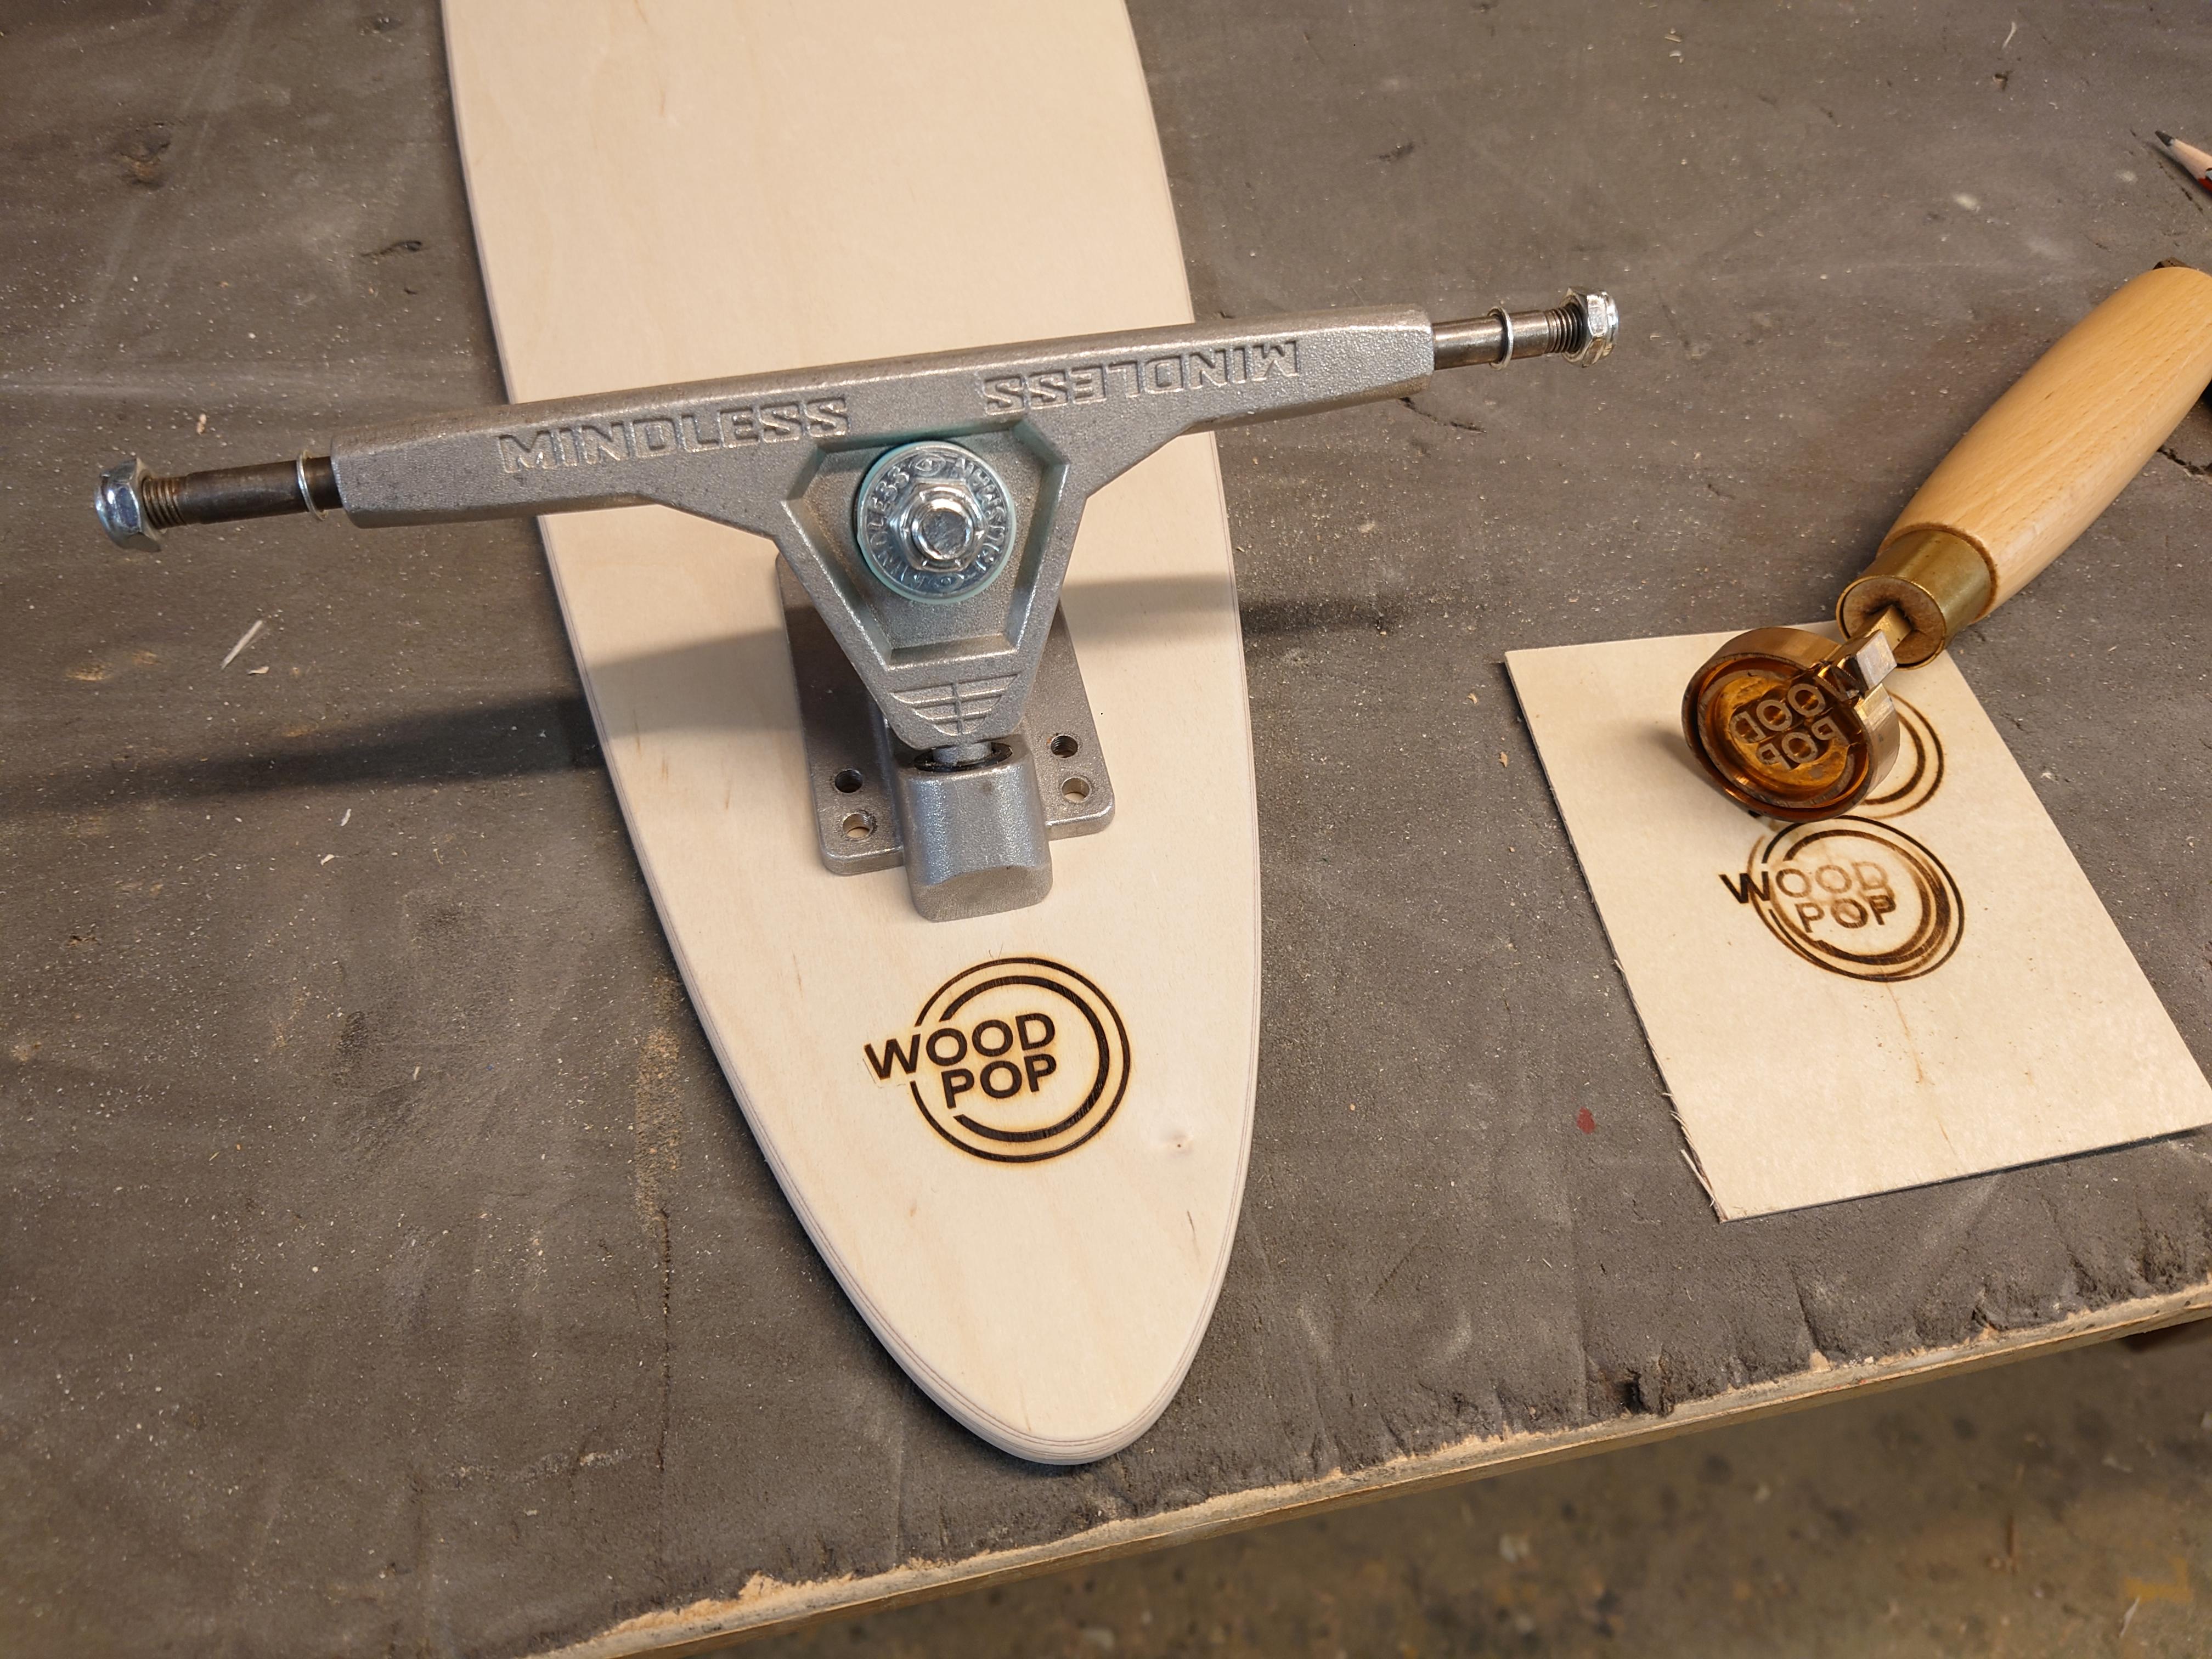 1M Marquetry Pintail Longboard.  Handcrafted Skateboards from  w o o d p o p. 1